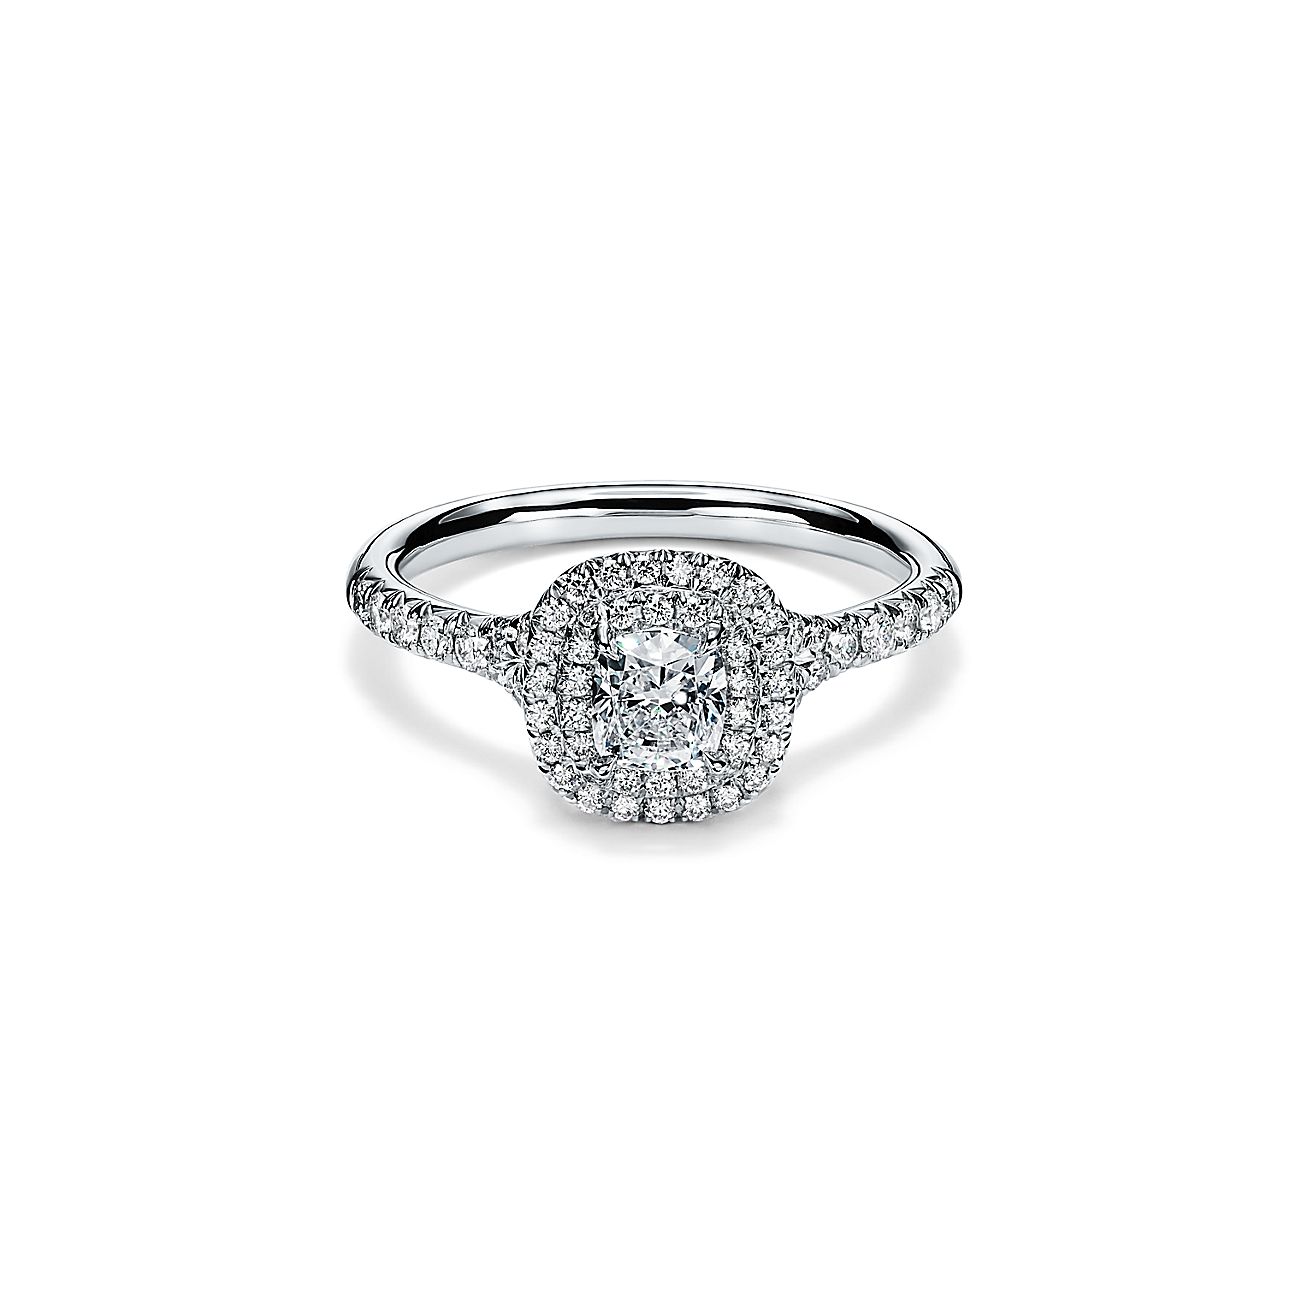 Tiffany & Co. Soleste Engagement Ring